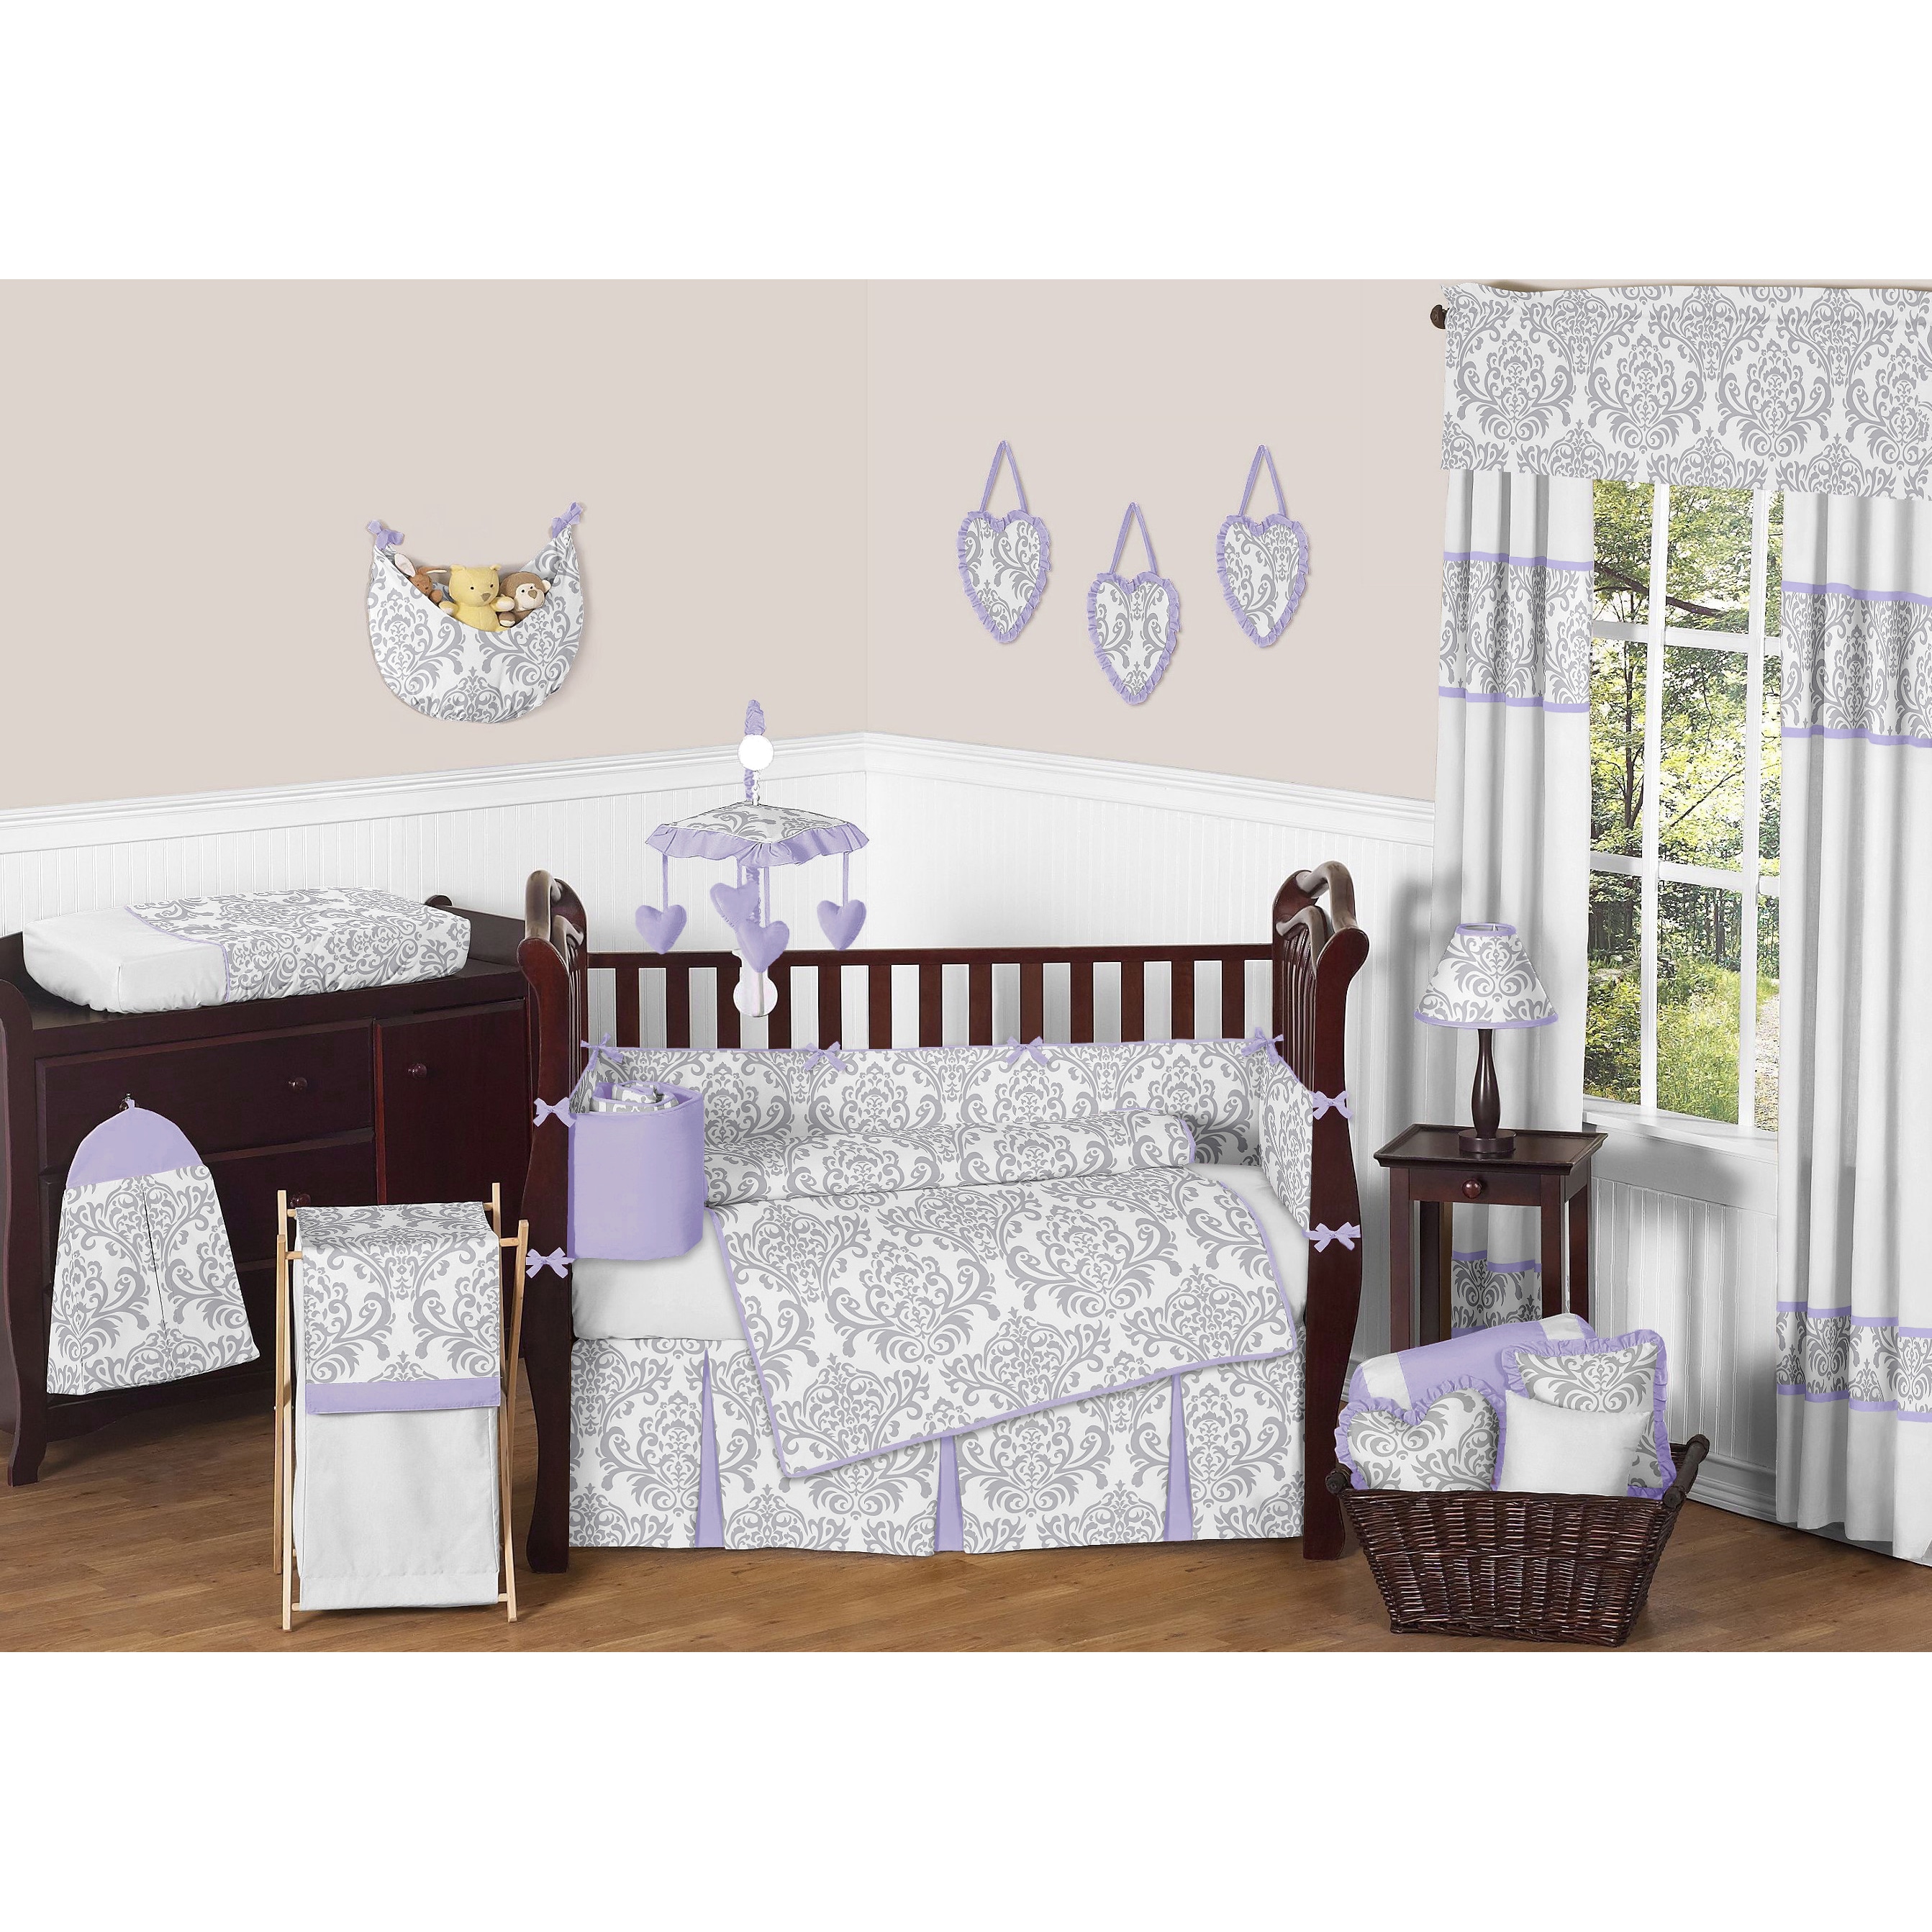 Sweet Jojo Designs Elizabeth 9 piece Crib Bedding Set (Grey/ white/ lavenderMaterial 100 percent cottonCare instructions Machine washableSet includes One (1) blanket, two (2) valances, one (1) bumper, one (1) crib skirt, one (1) fitted sheet, one (1) d